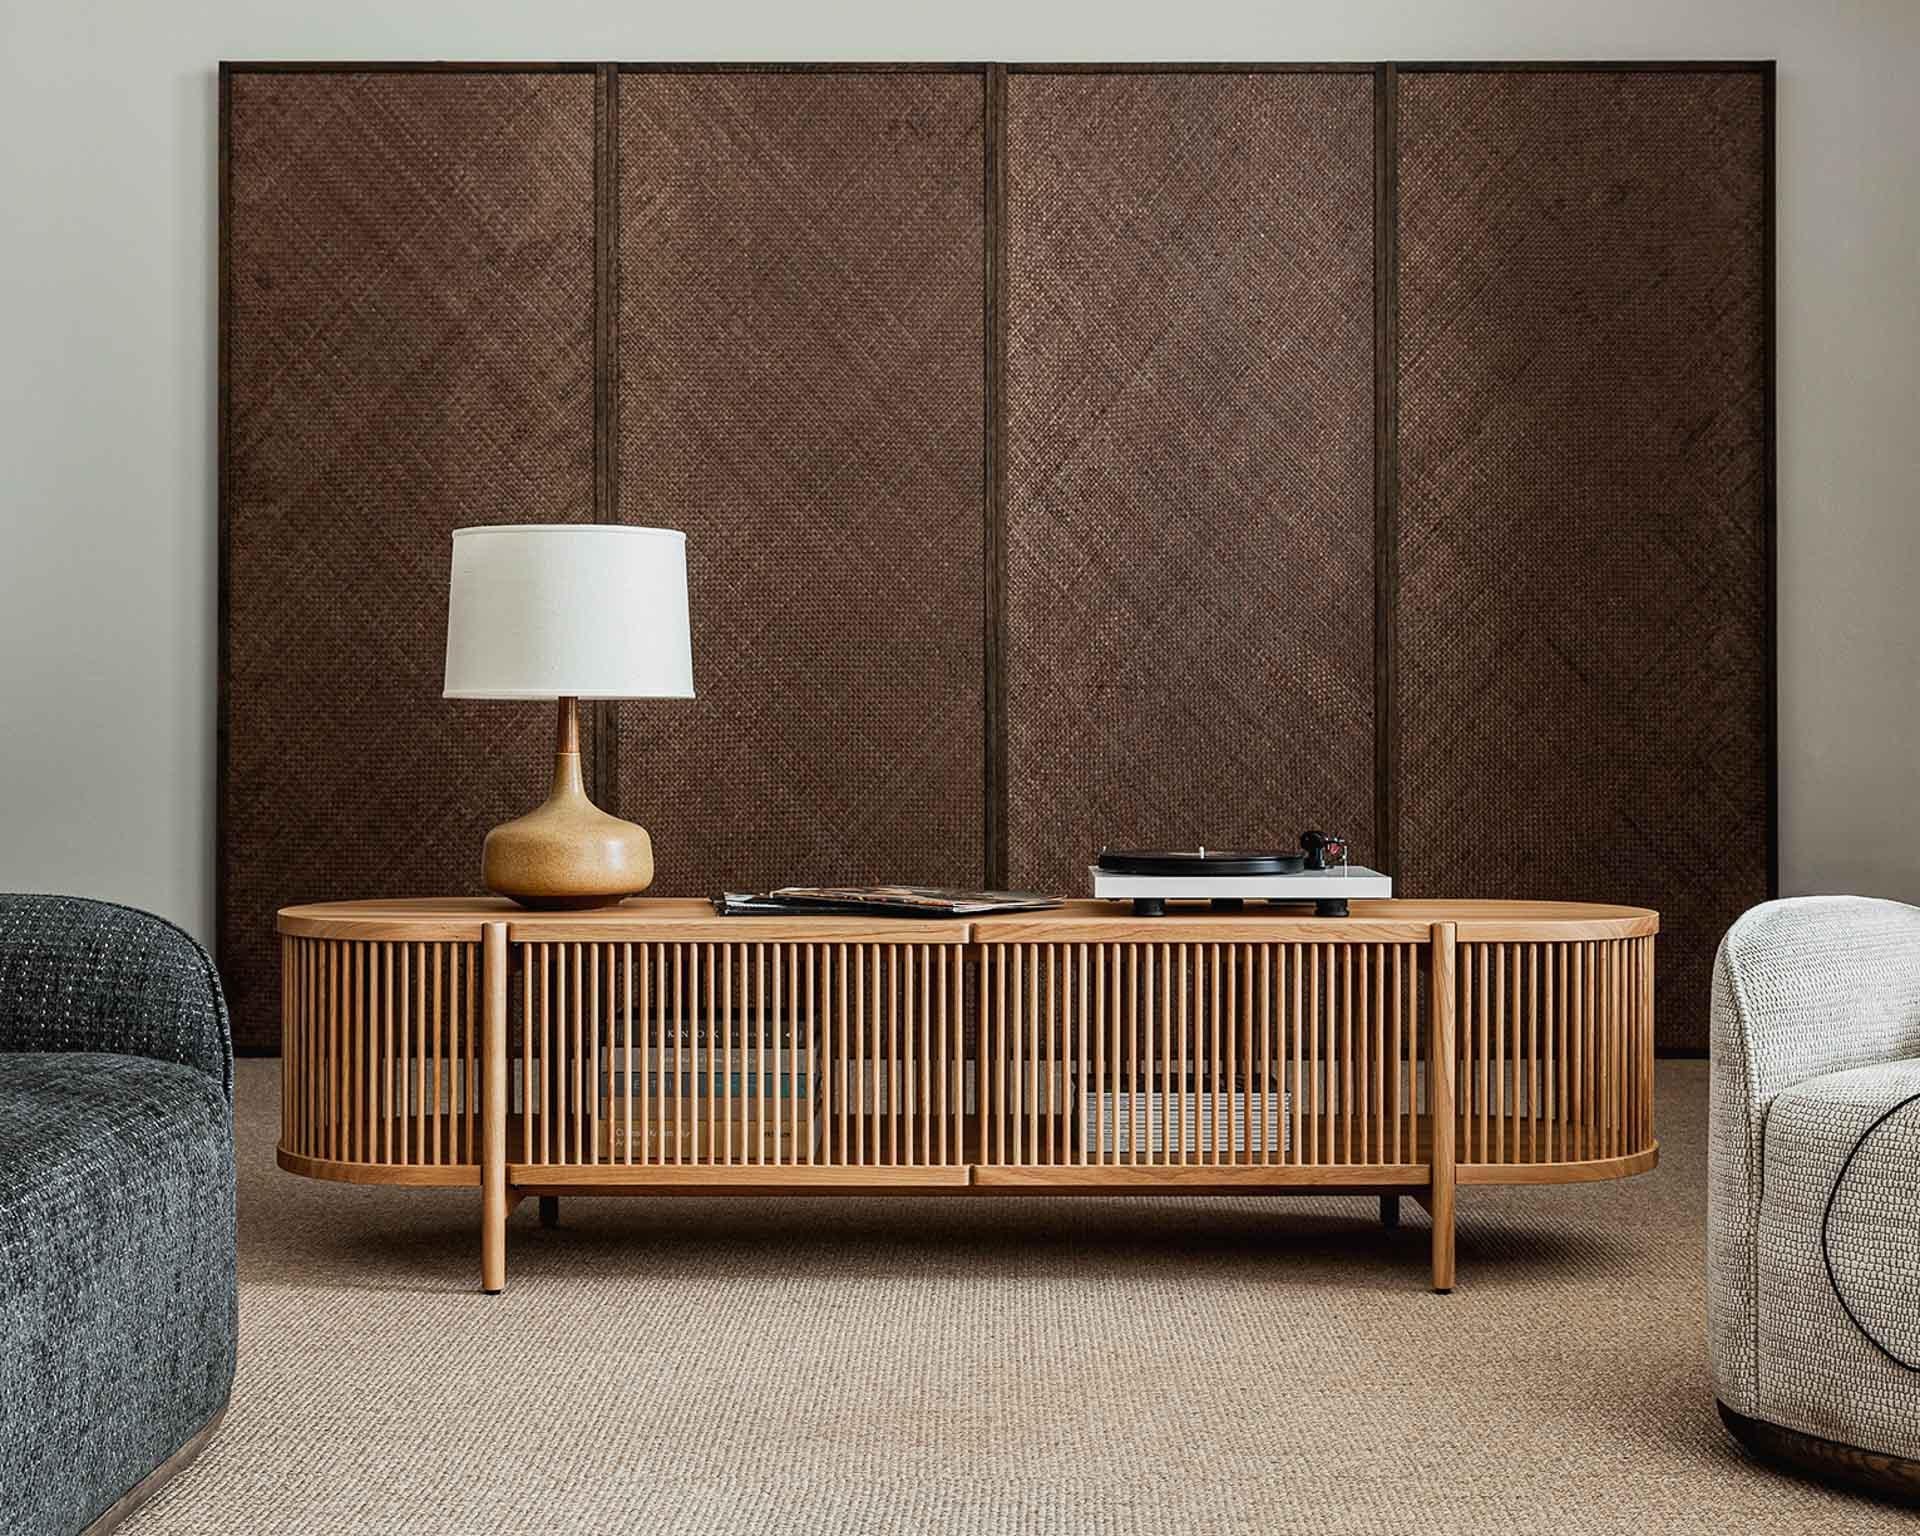 The Bastone case piece collection, which consists of a cabinet and a sideboards, is designed by the master cabinet maker and designer Antrei Hartikainen for Poiat studio. Somewhere on the boundary of art and design, the collection showcases the